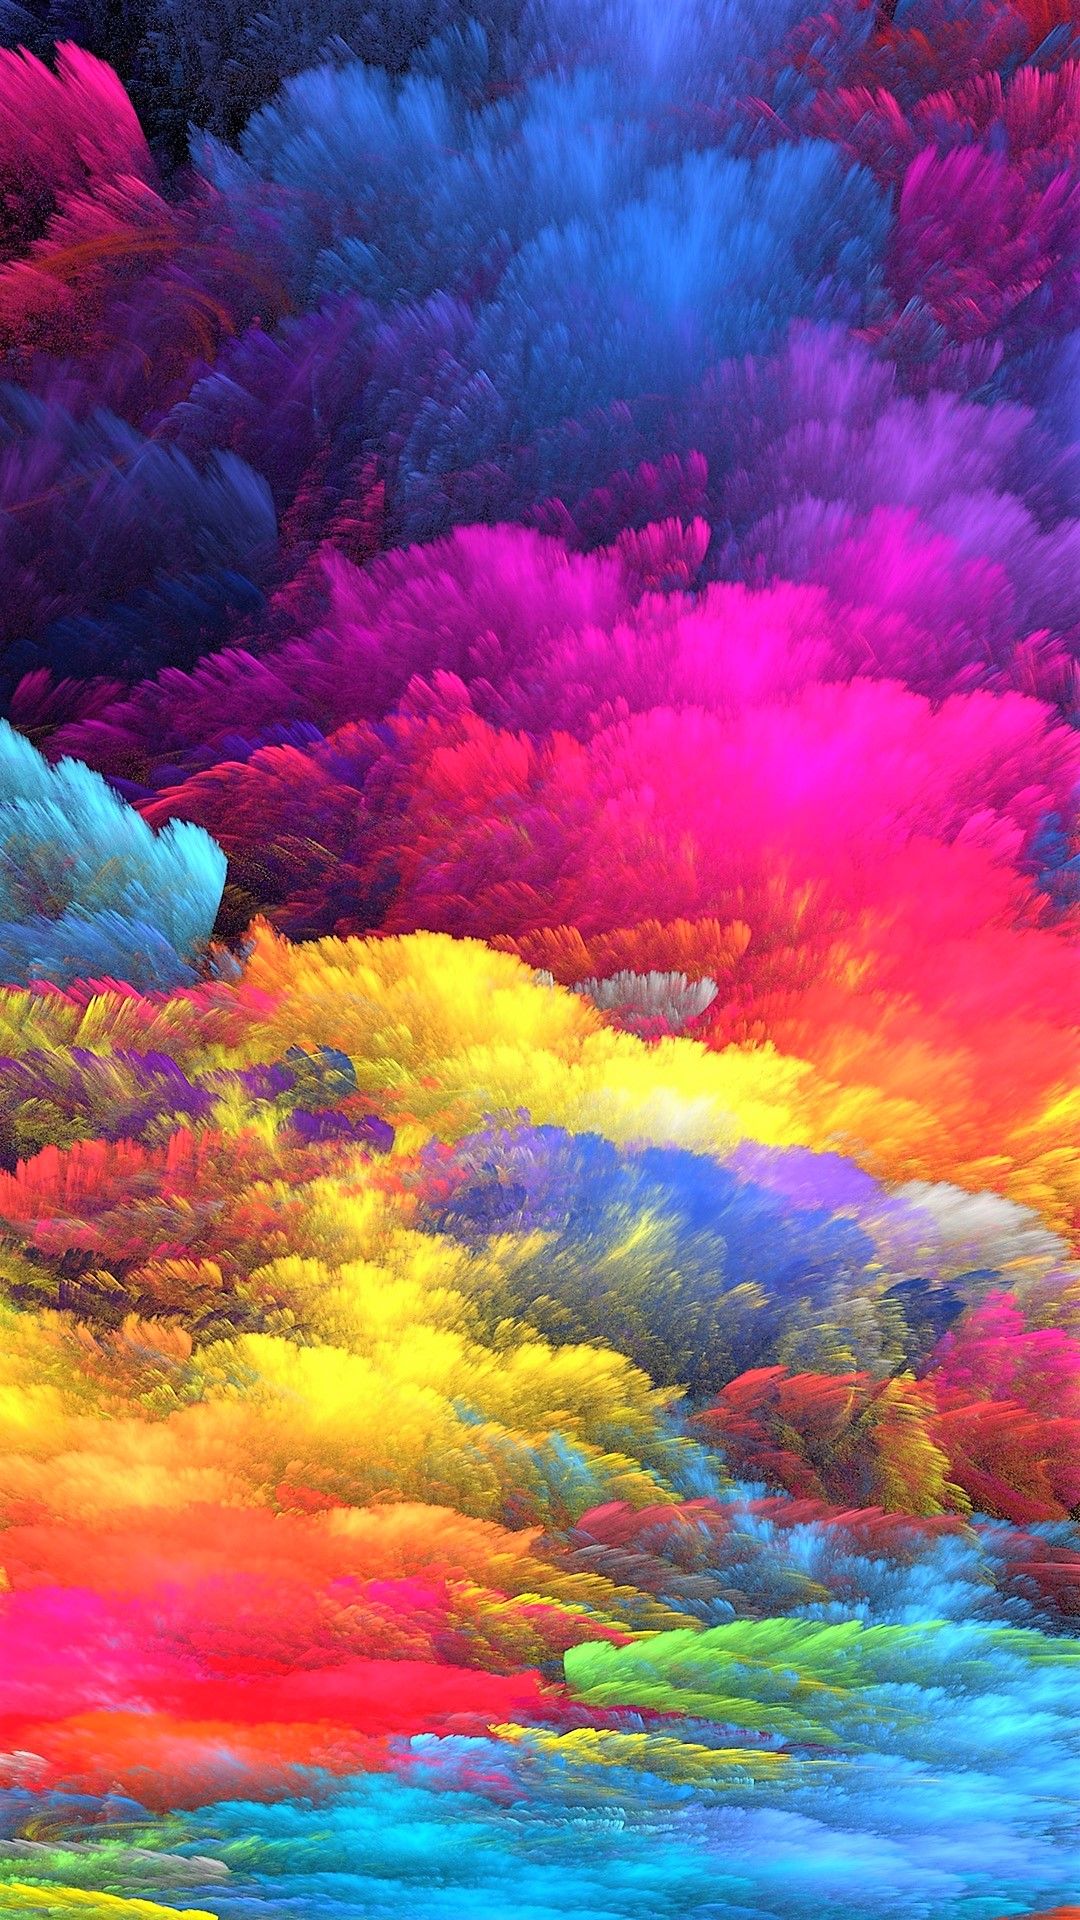 Color Explosion Apple iPhone 5s HD Wallpaper Available For